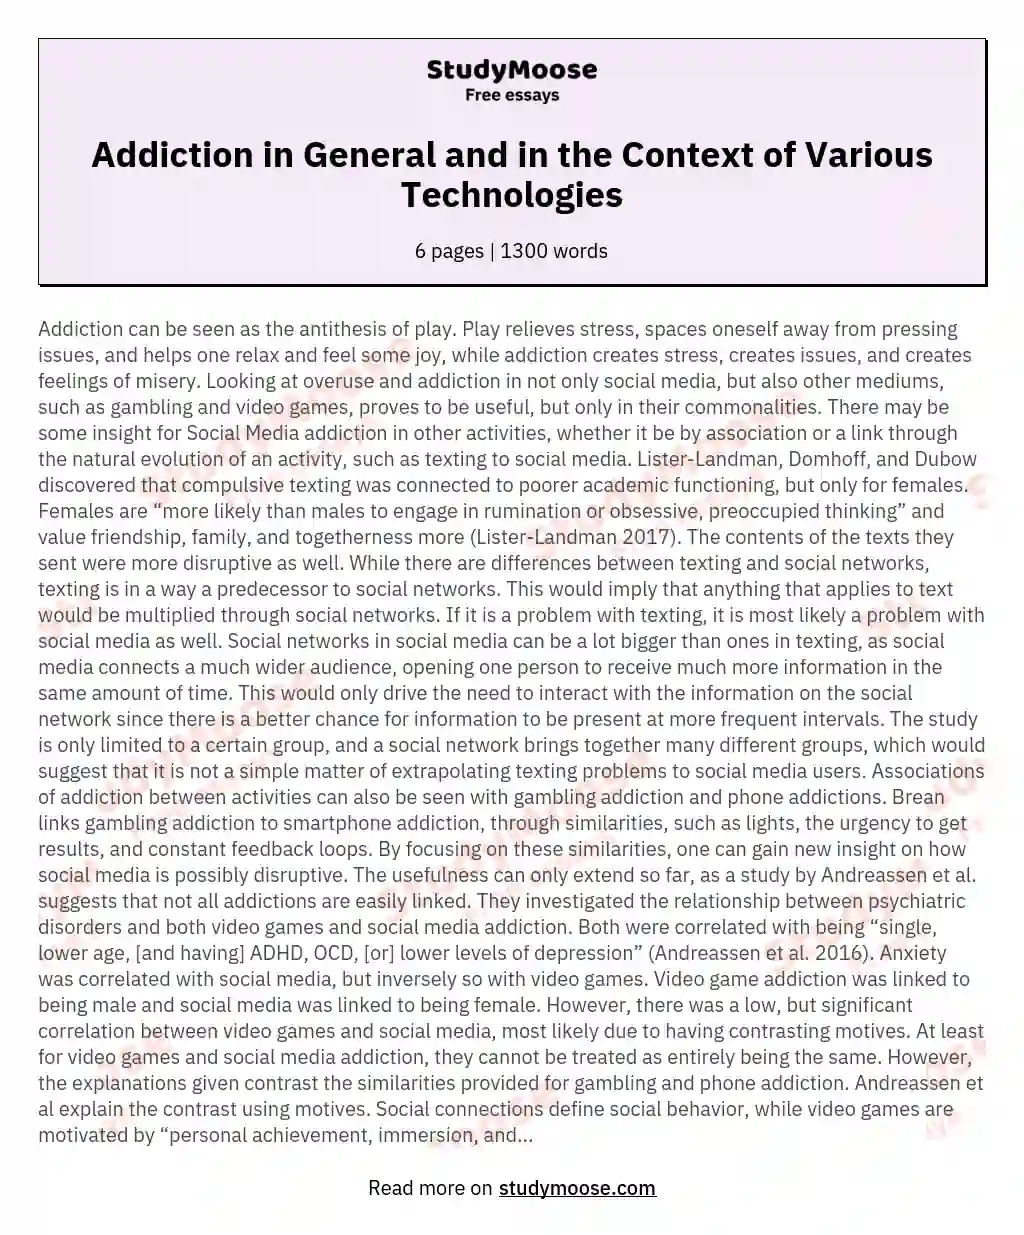 Addiction in General and in the Context of Various Technologies essay